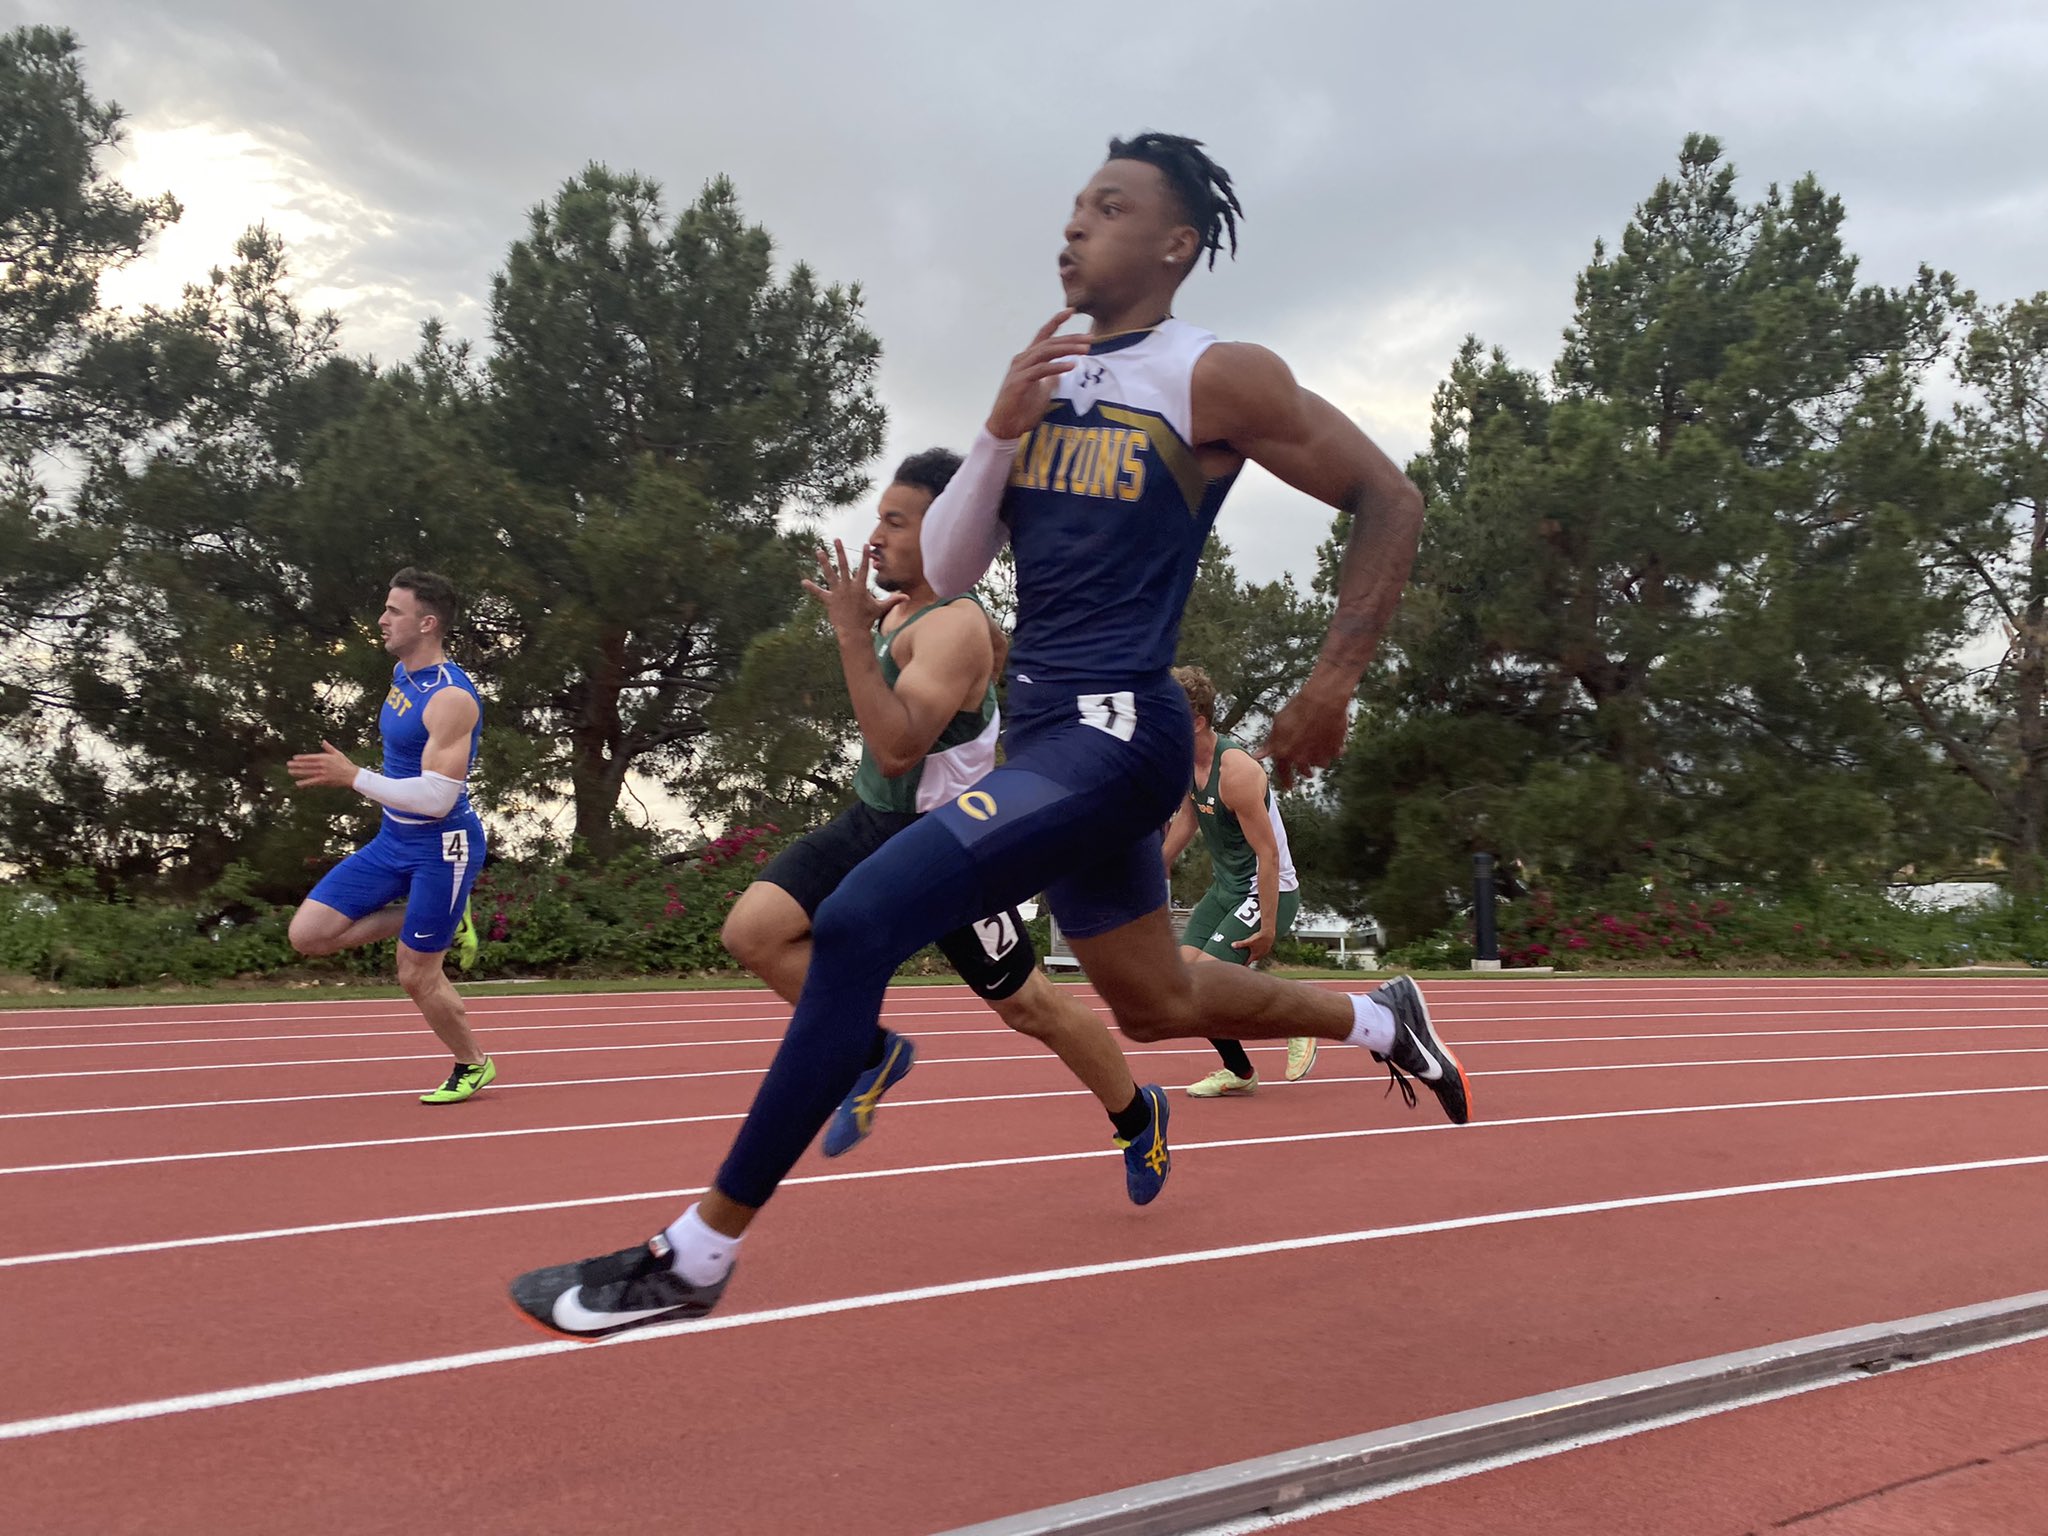 College of the Canyons track & field stock image.